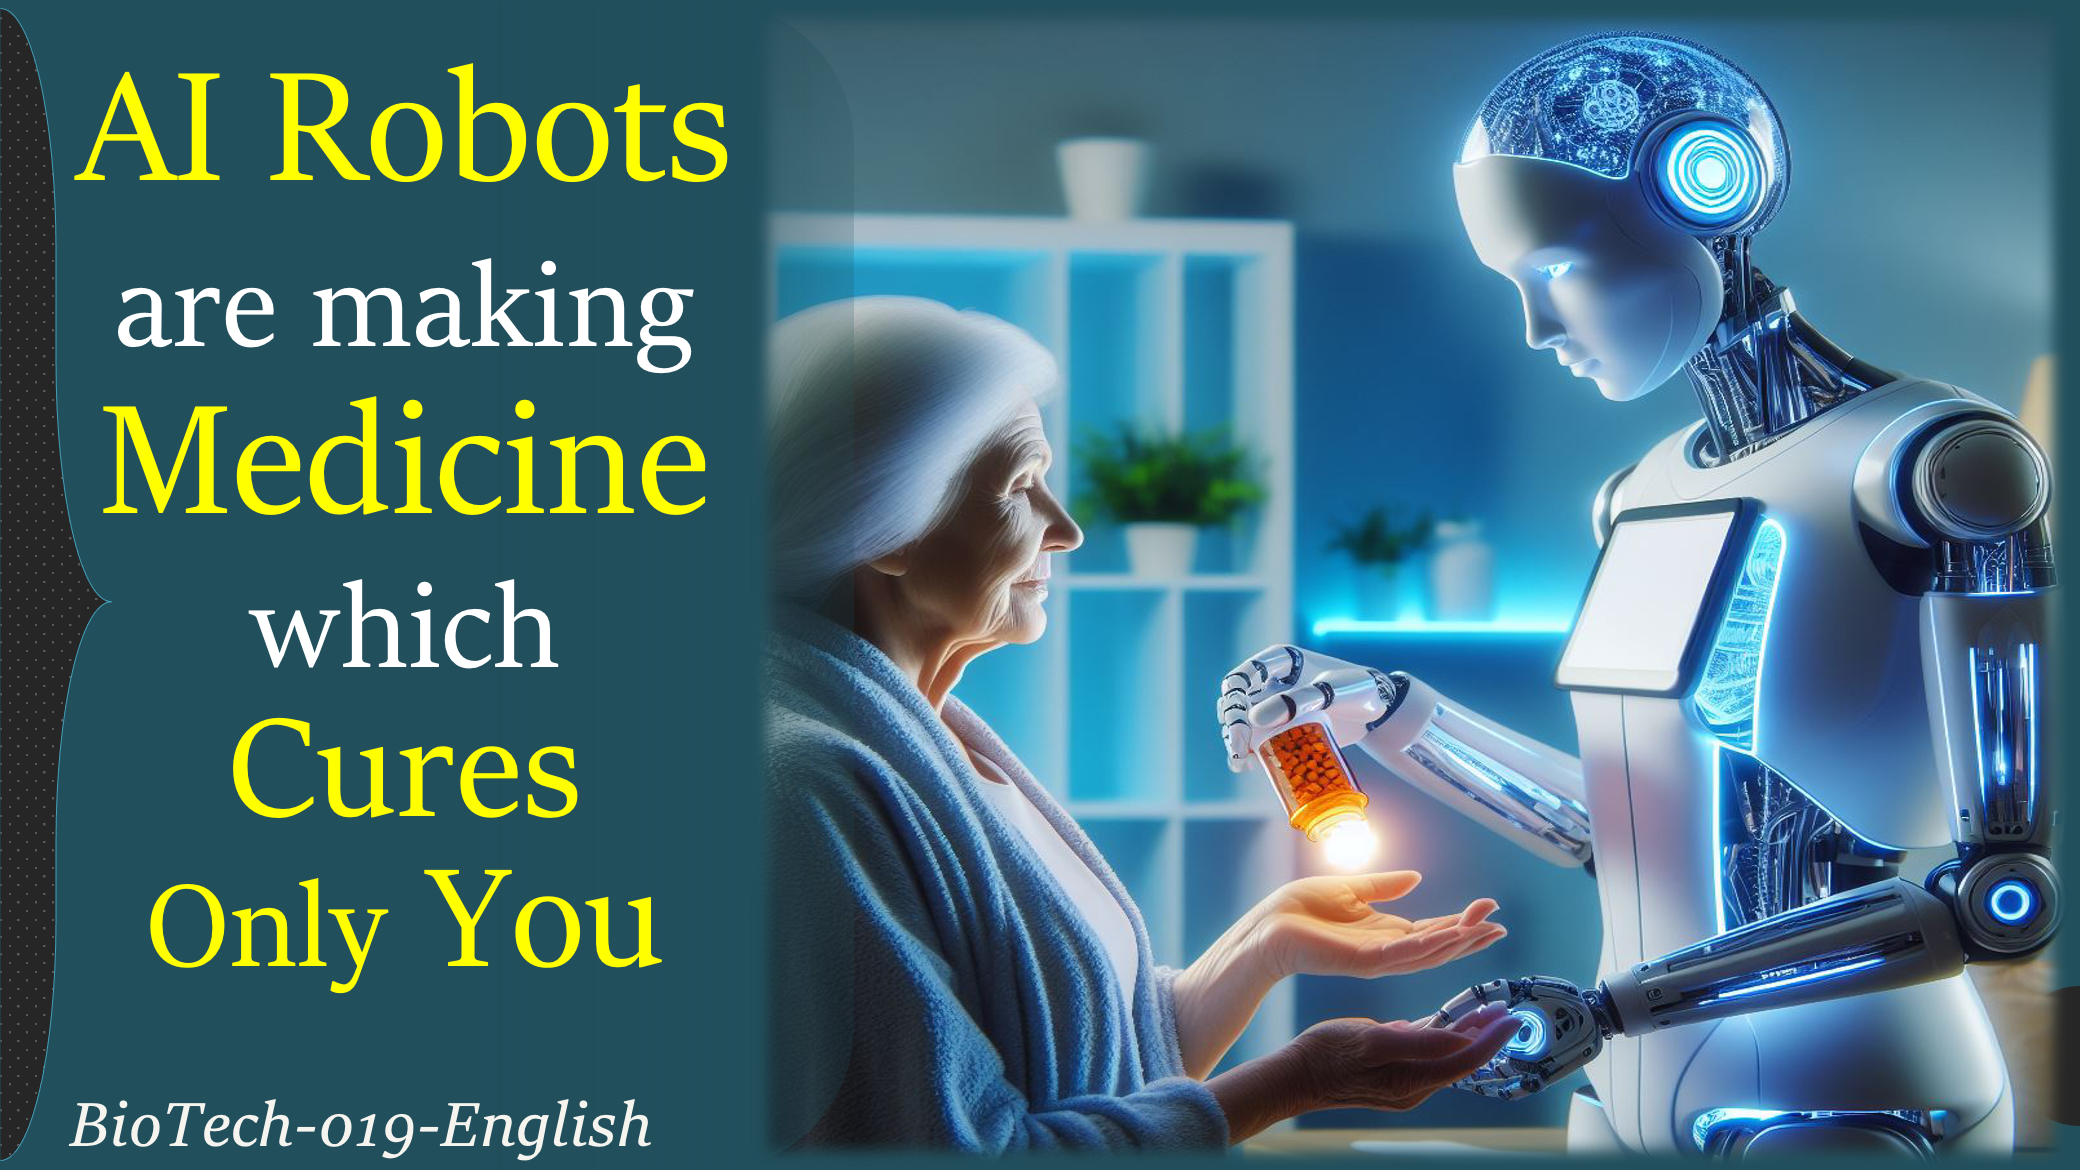 AI Robots making Medicine that works only for specific Human